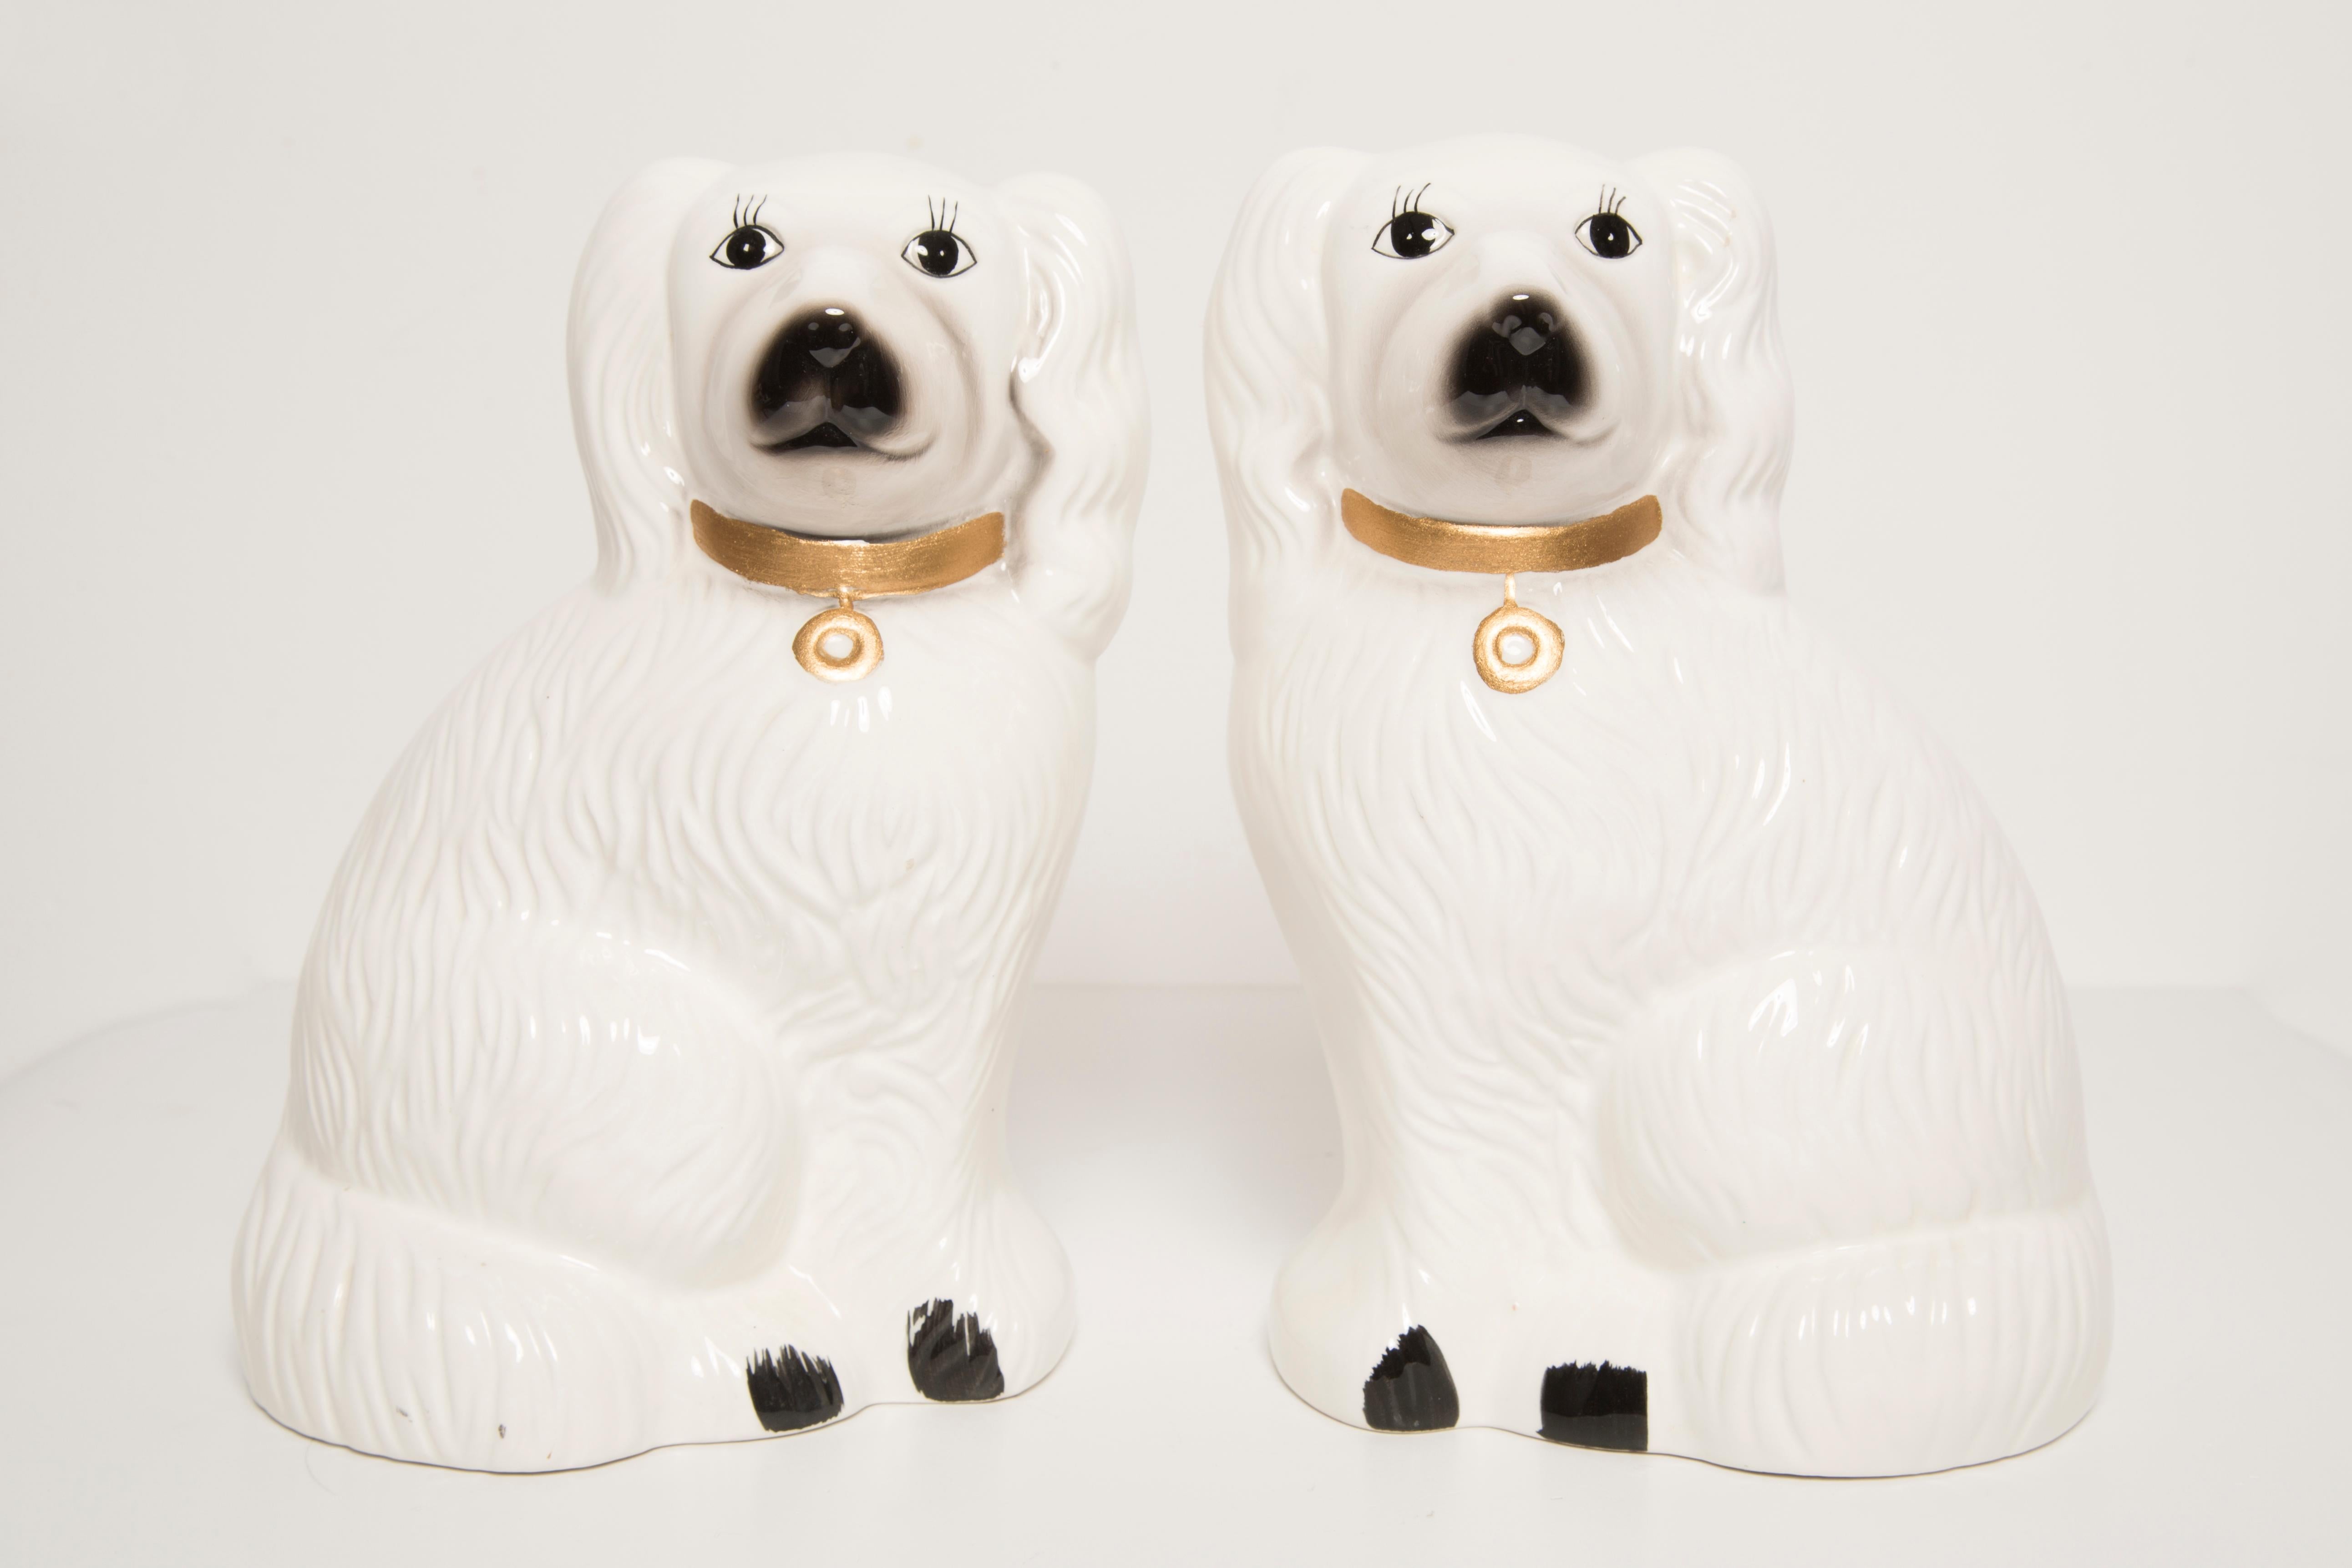 Painted ceramic, good original vintage condition. Beautiful and unique decorative sculptures. White Spaniel Dogs Sculpture was produced in Staffordshire, England in 1960s. Only one pair of dogs are available.